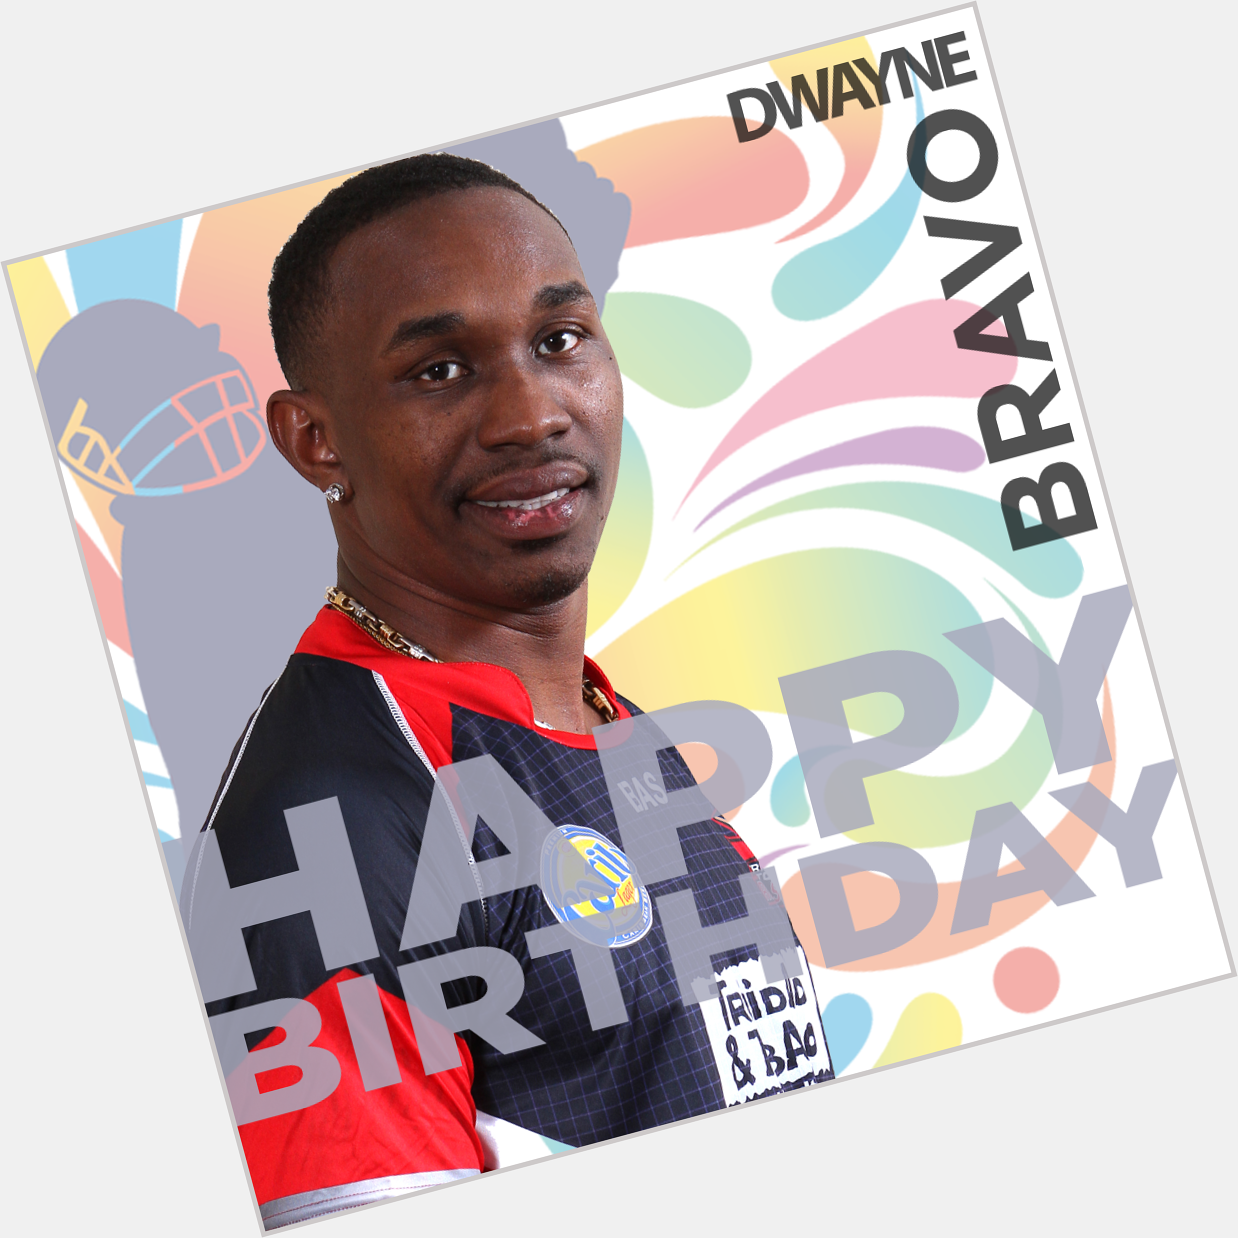 A very happy 32nd birthday to the undisputed star of - the great DWAYNE BRAVO!! 